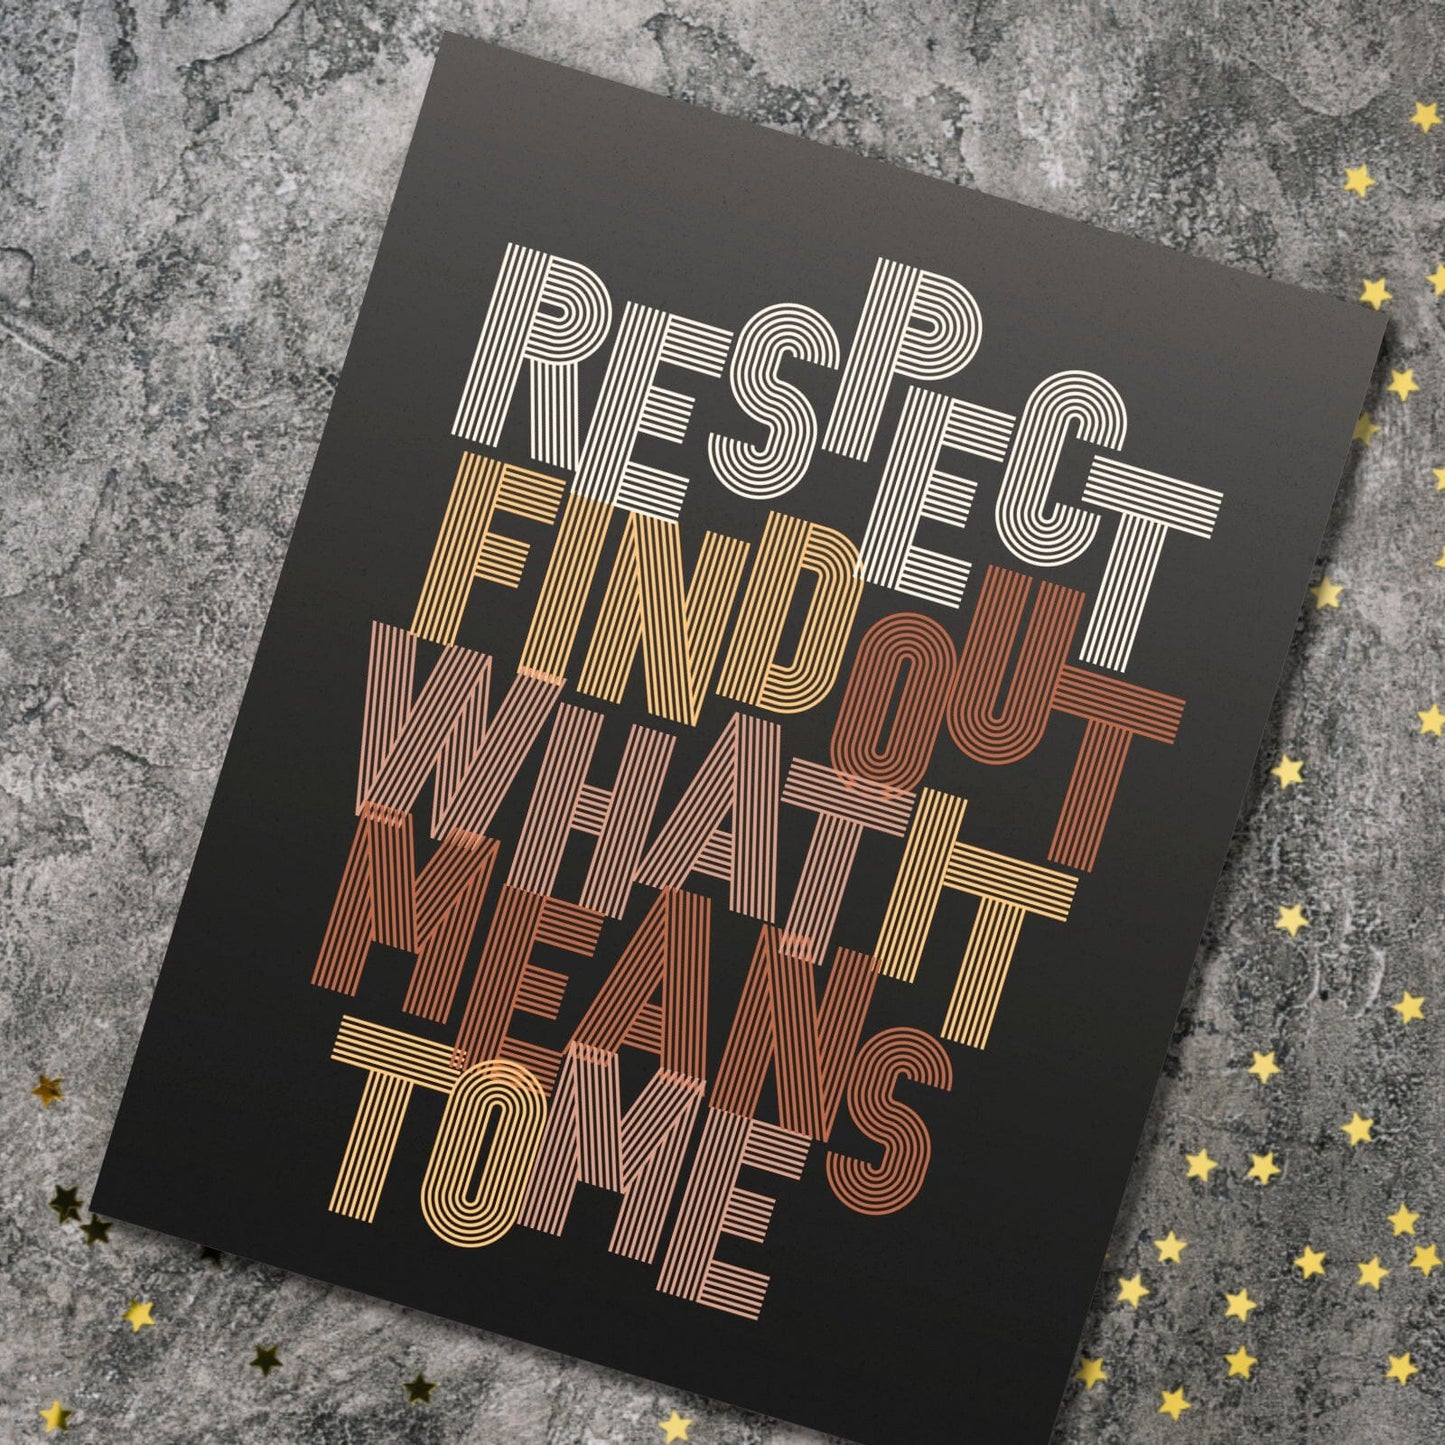 RESPECT by Aretha Franklin - Song Lyric Motown Soul Music Song Lyrics Art Song Lyrics Art 8x10 Unframed Print 